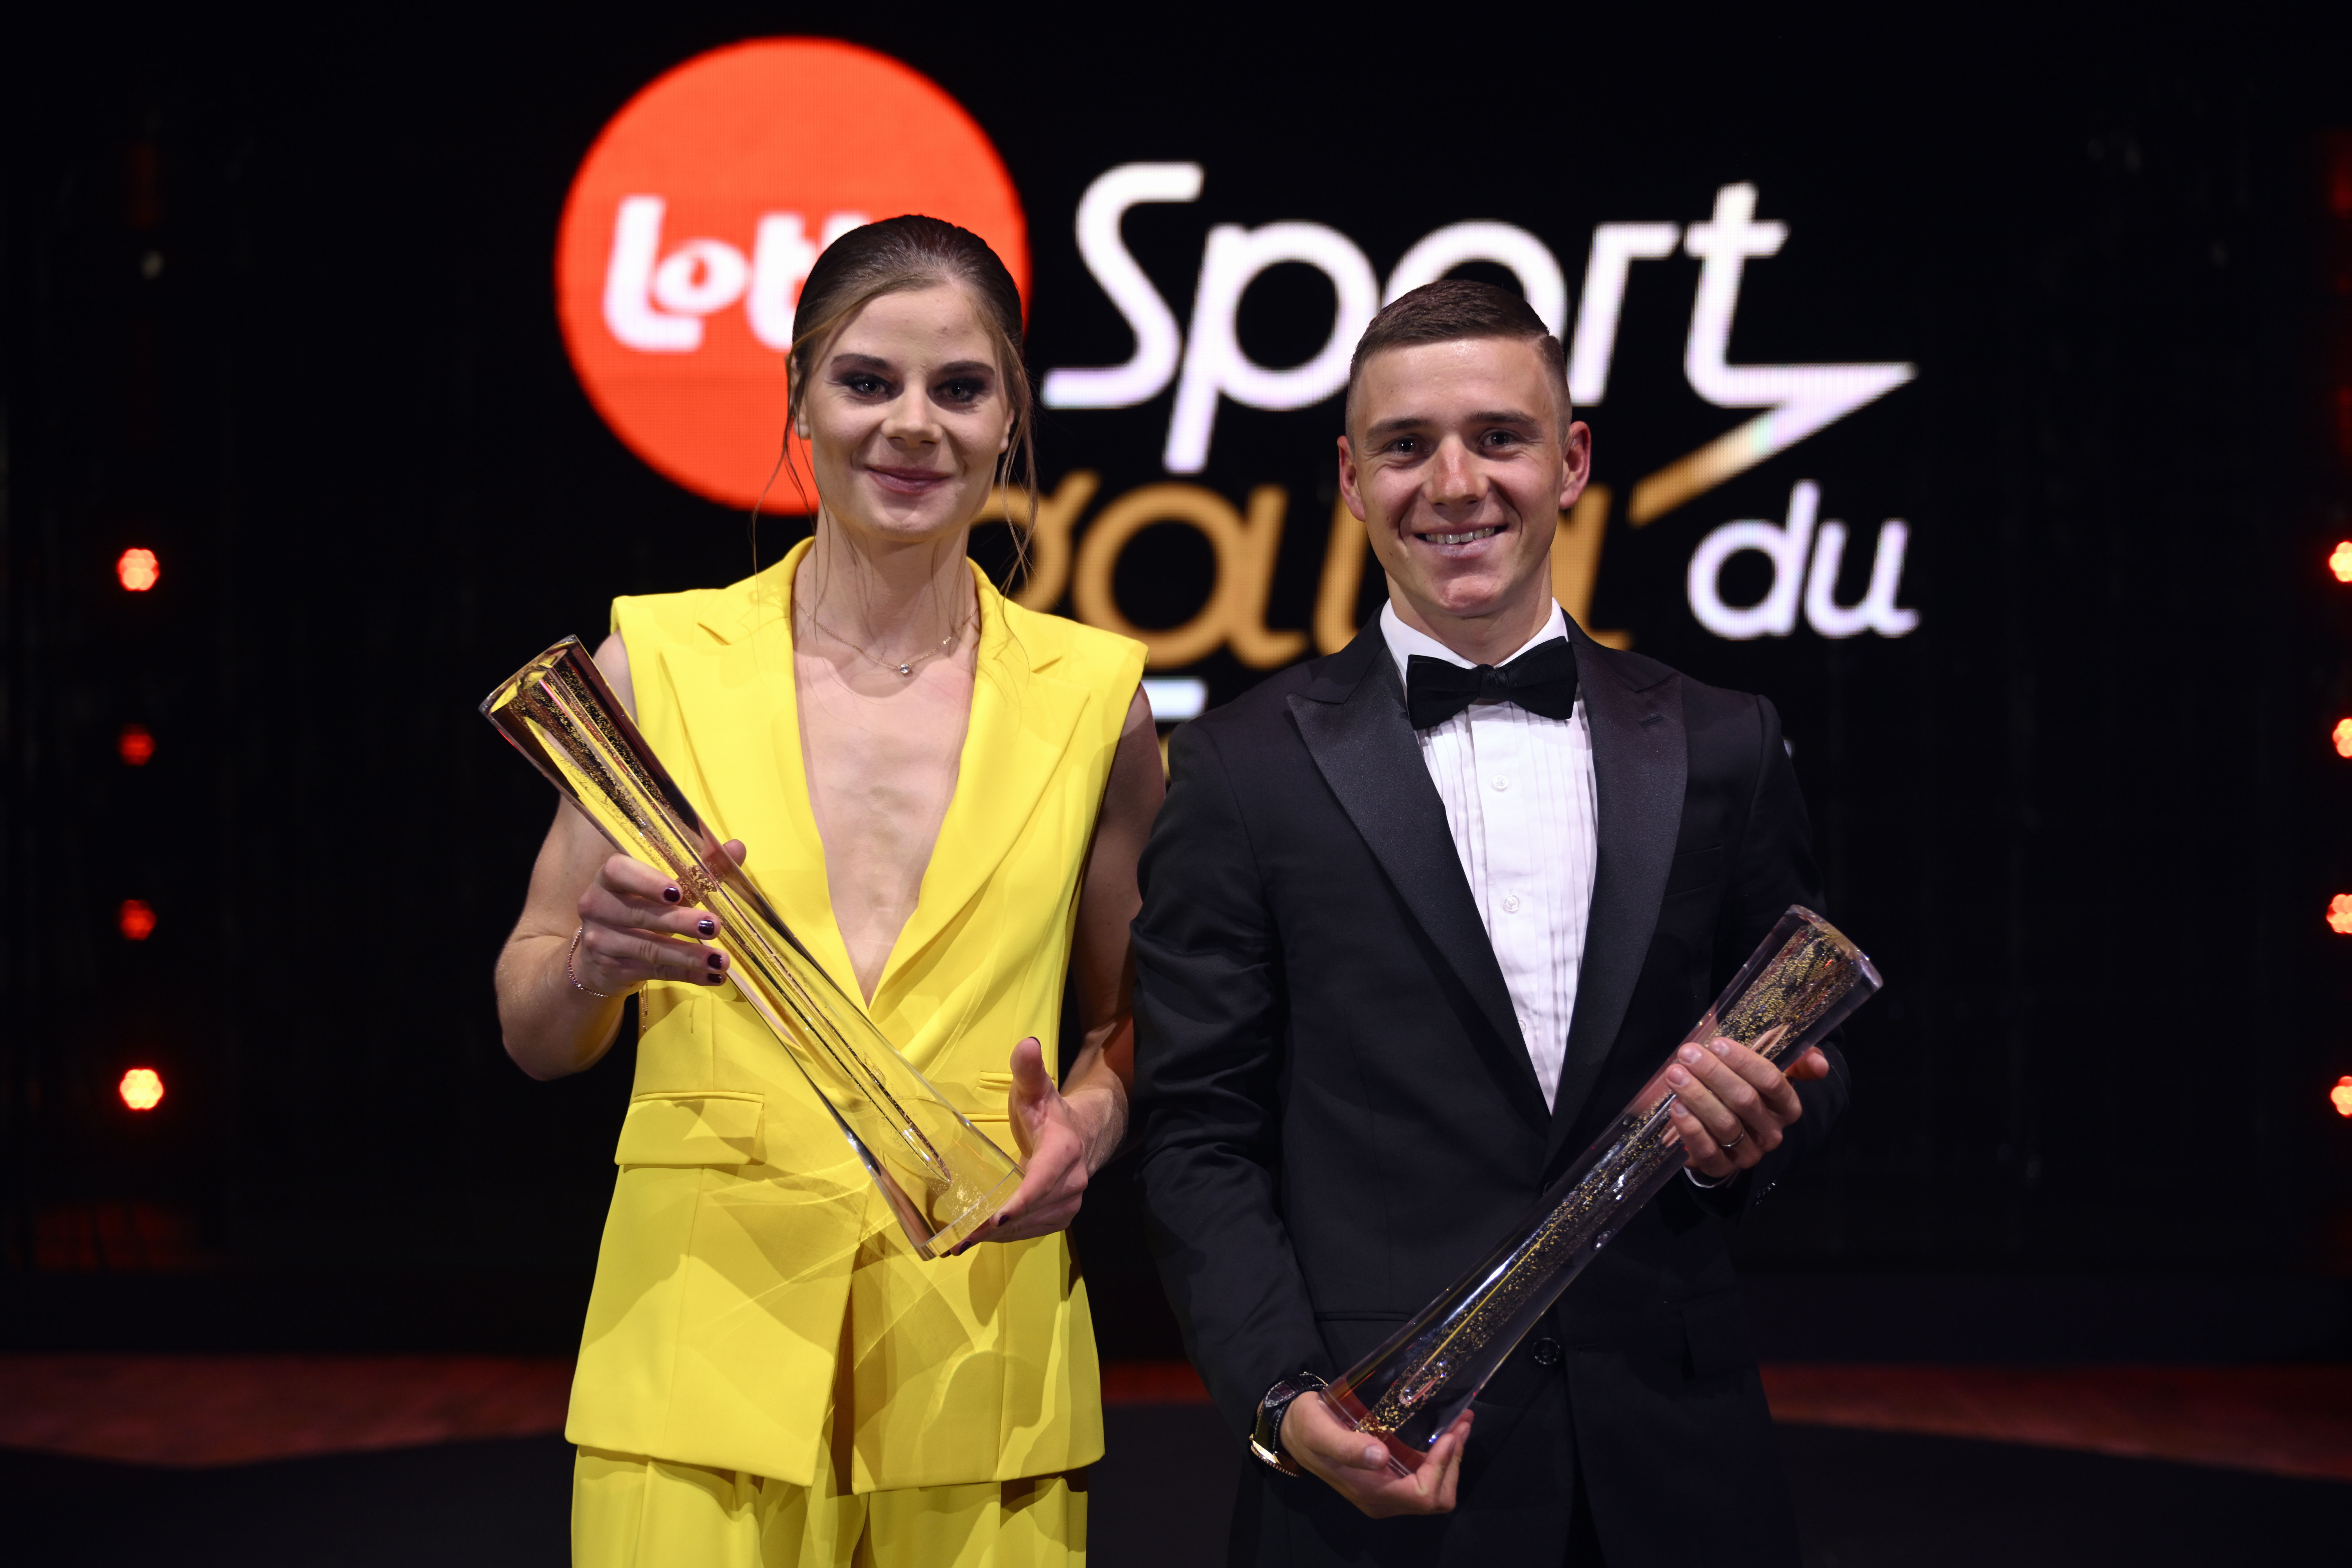 Lotte Kopecky and Remco Evenepoel at the Belgian Sports Gala © BELGA PHOTO LAURIE DIEFFEMBACQ